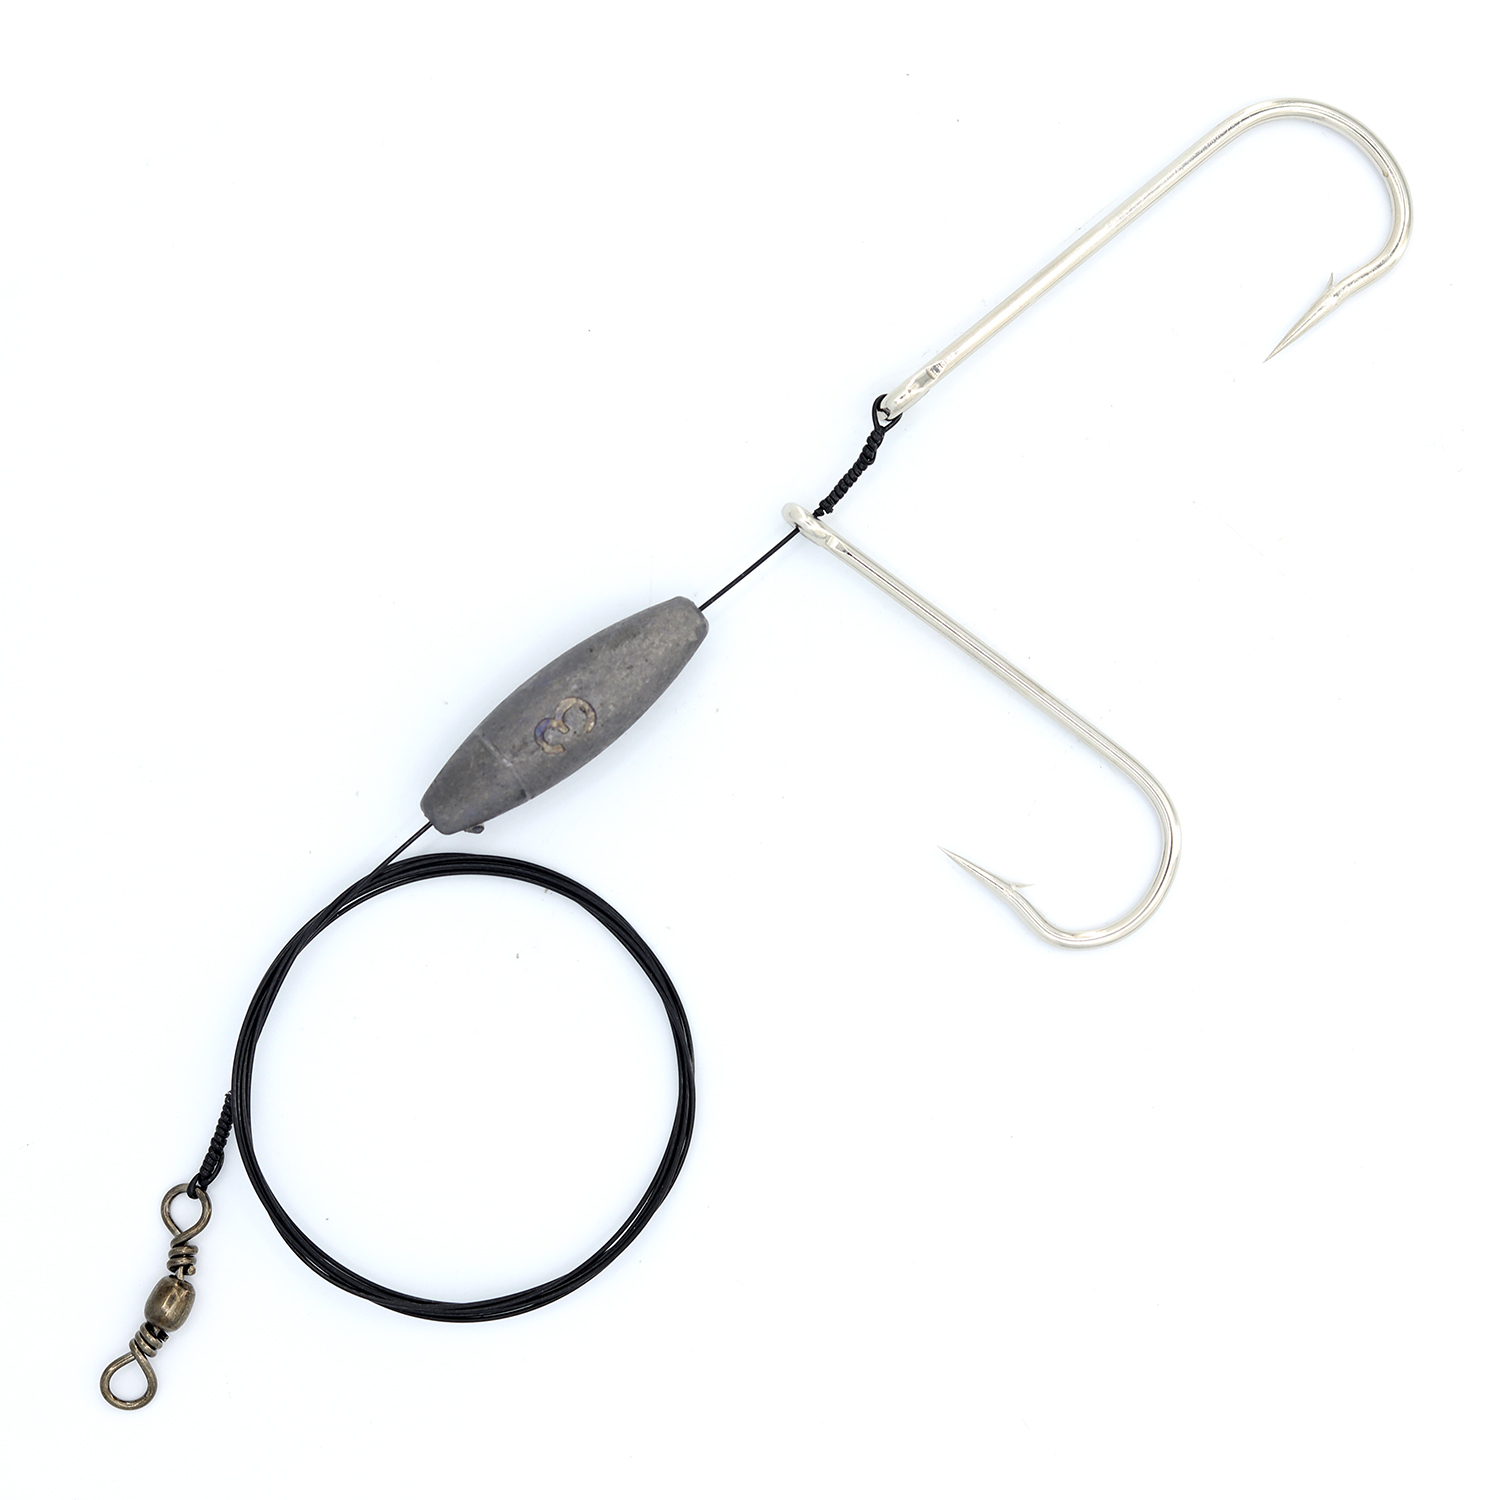 qareb american wire rig with double hooks sizes 1 and 2, sinker size 3 and wire test 90lb